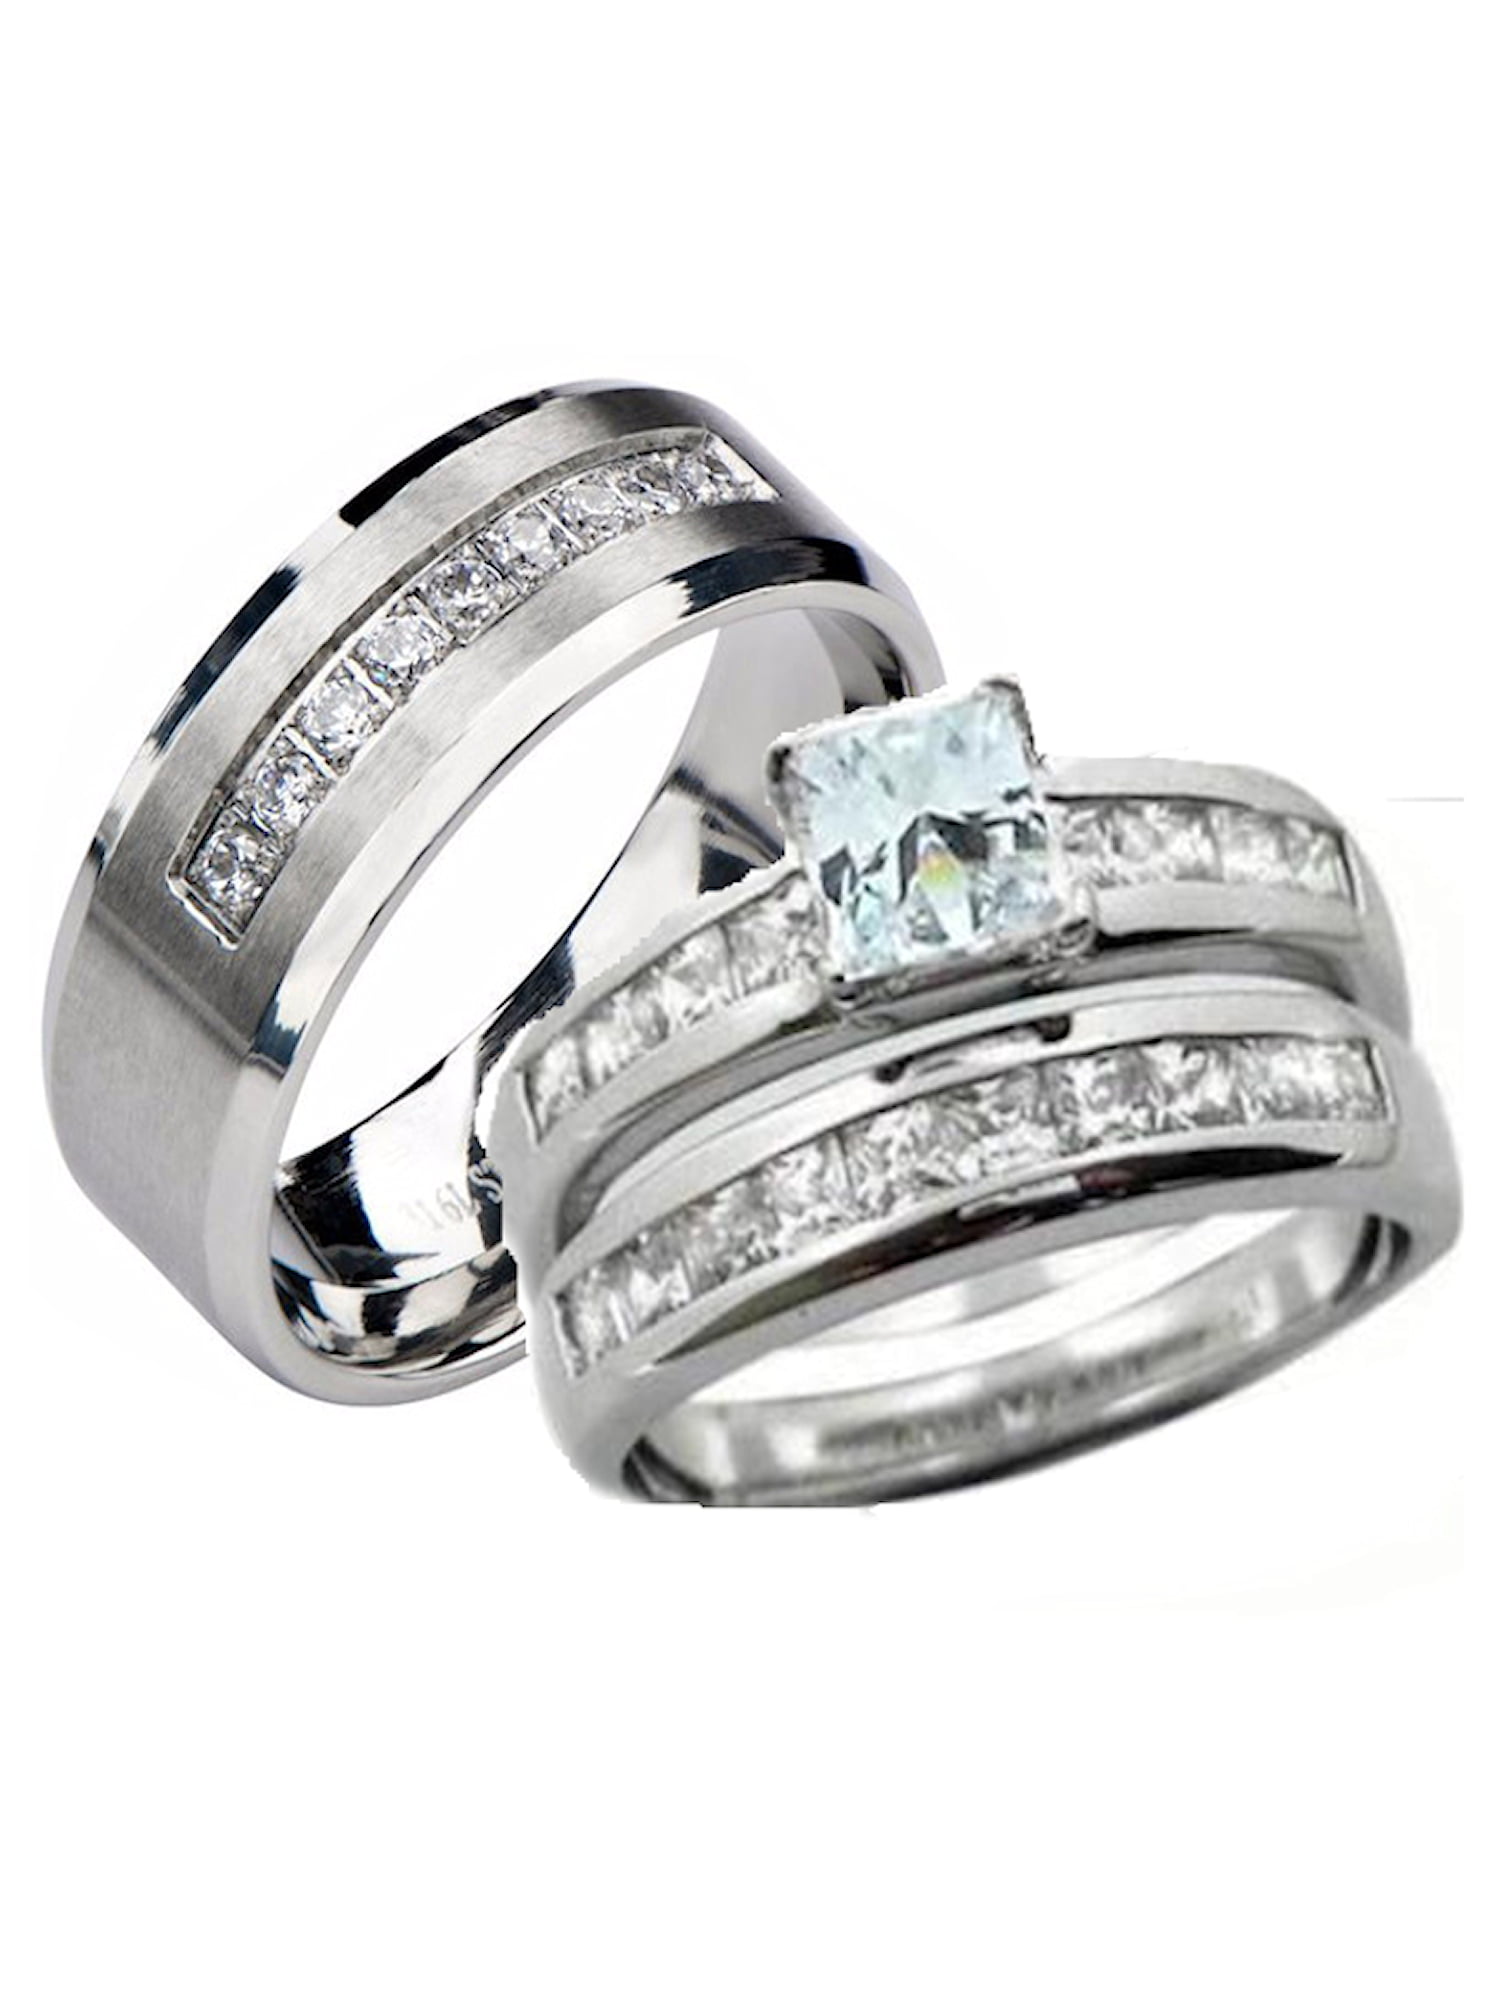 Mens Sizes 8-14 Sterling Silver 3-Piece His 7 mm & Hers 4 mm Trio Wedding Ring Set CZ Stones Rhodium Finish Ladies Sizes 5-10 